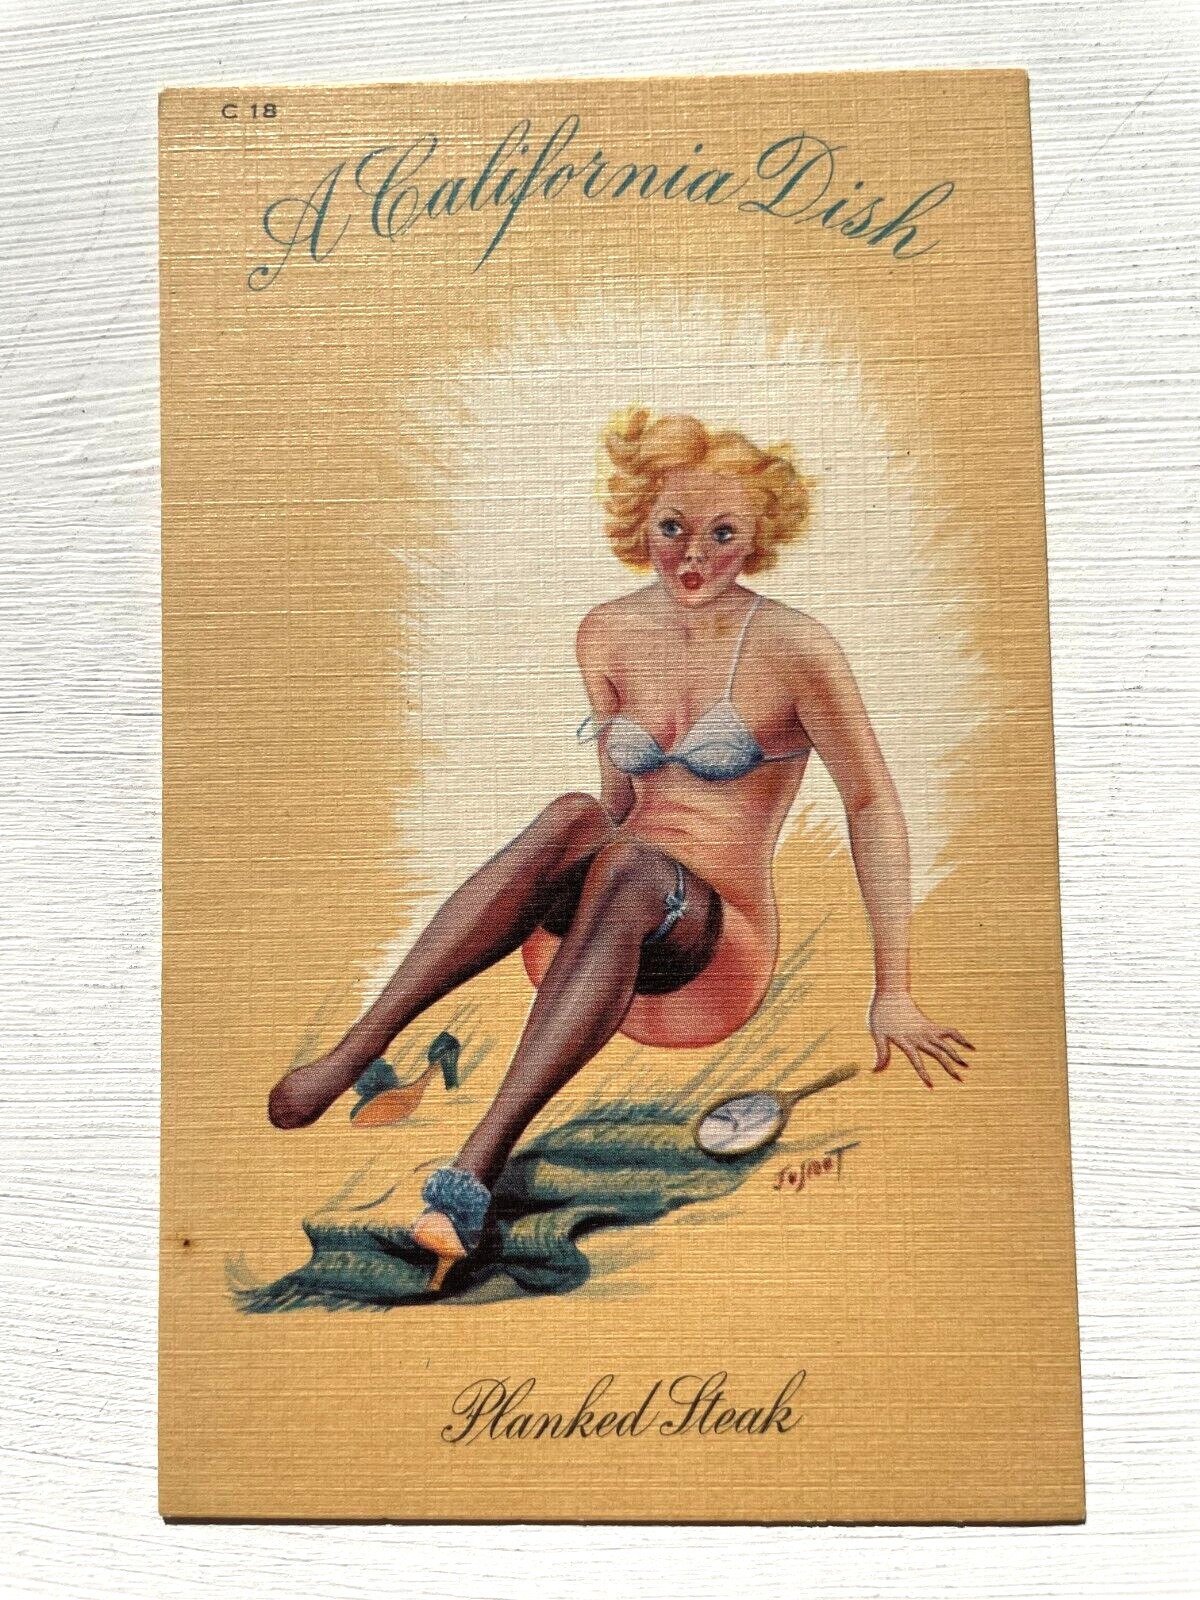 Vintage 1940's Pinup Girl Picture Mutoscope Card- A California Dish